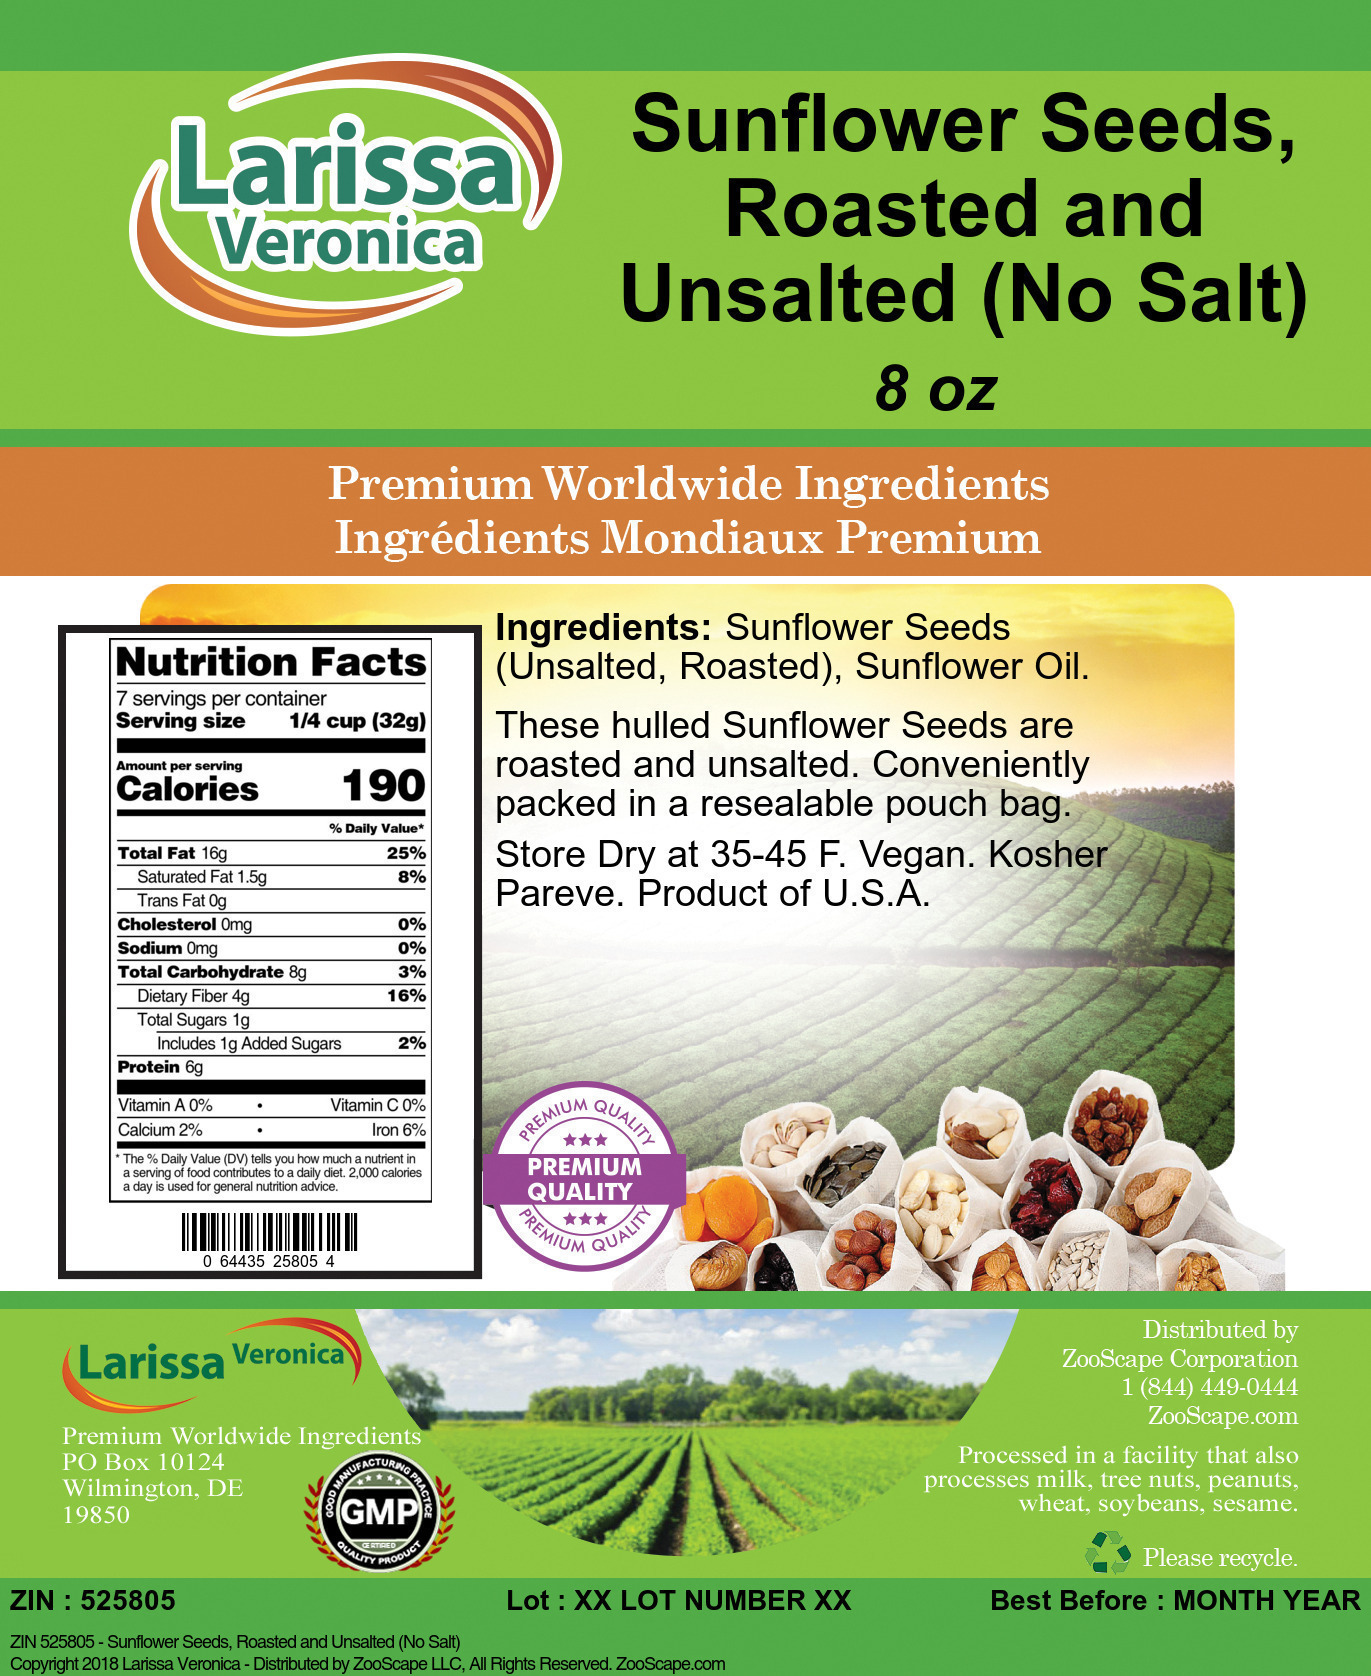 Sunflower Seeds, Roasted and Unsalted (No Salt) - Label